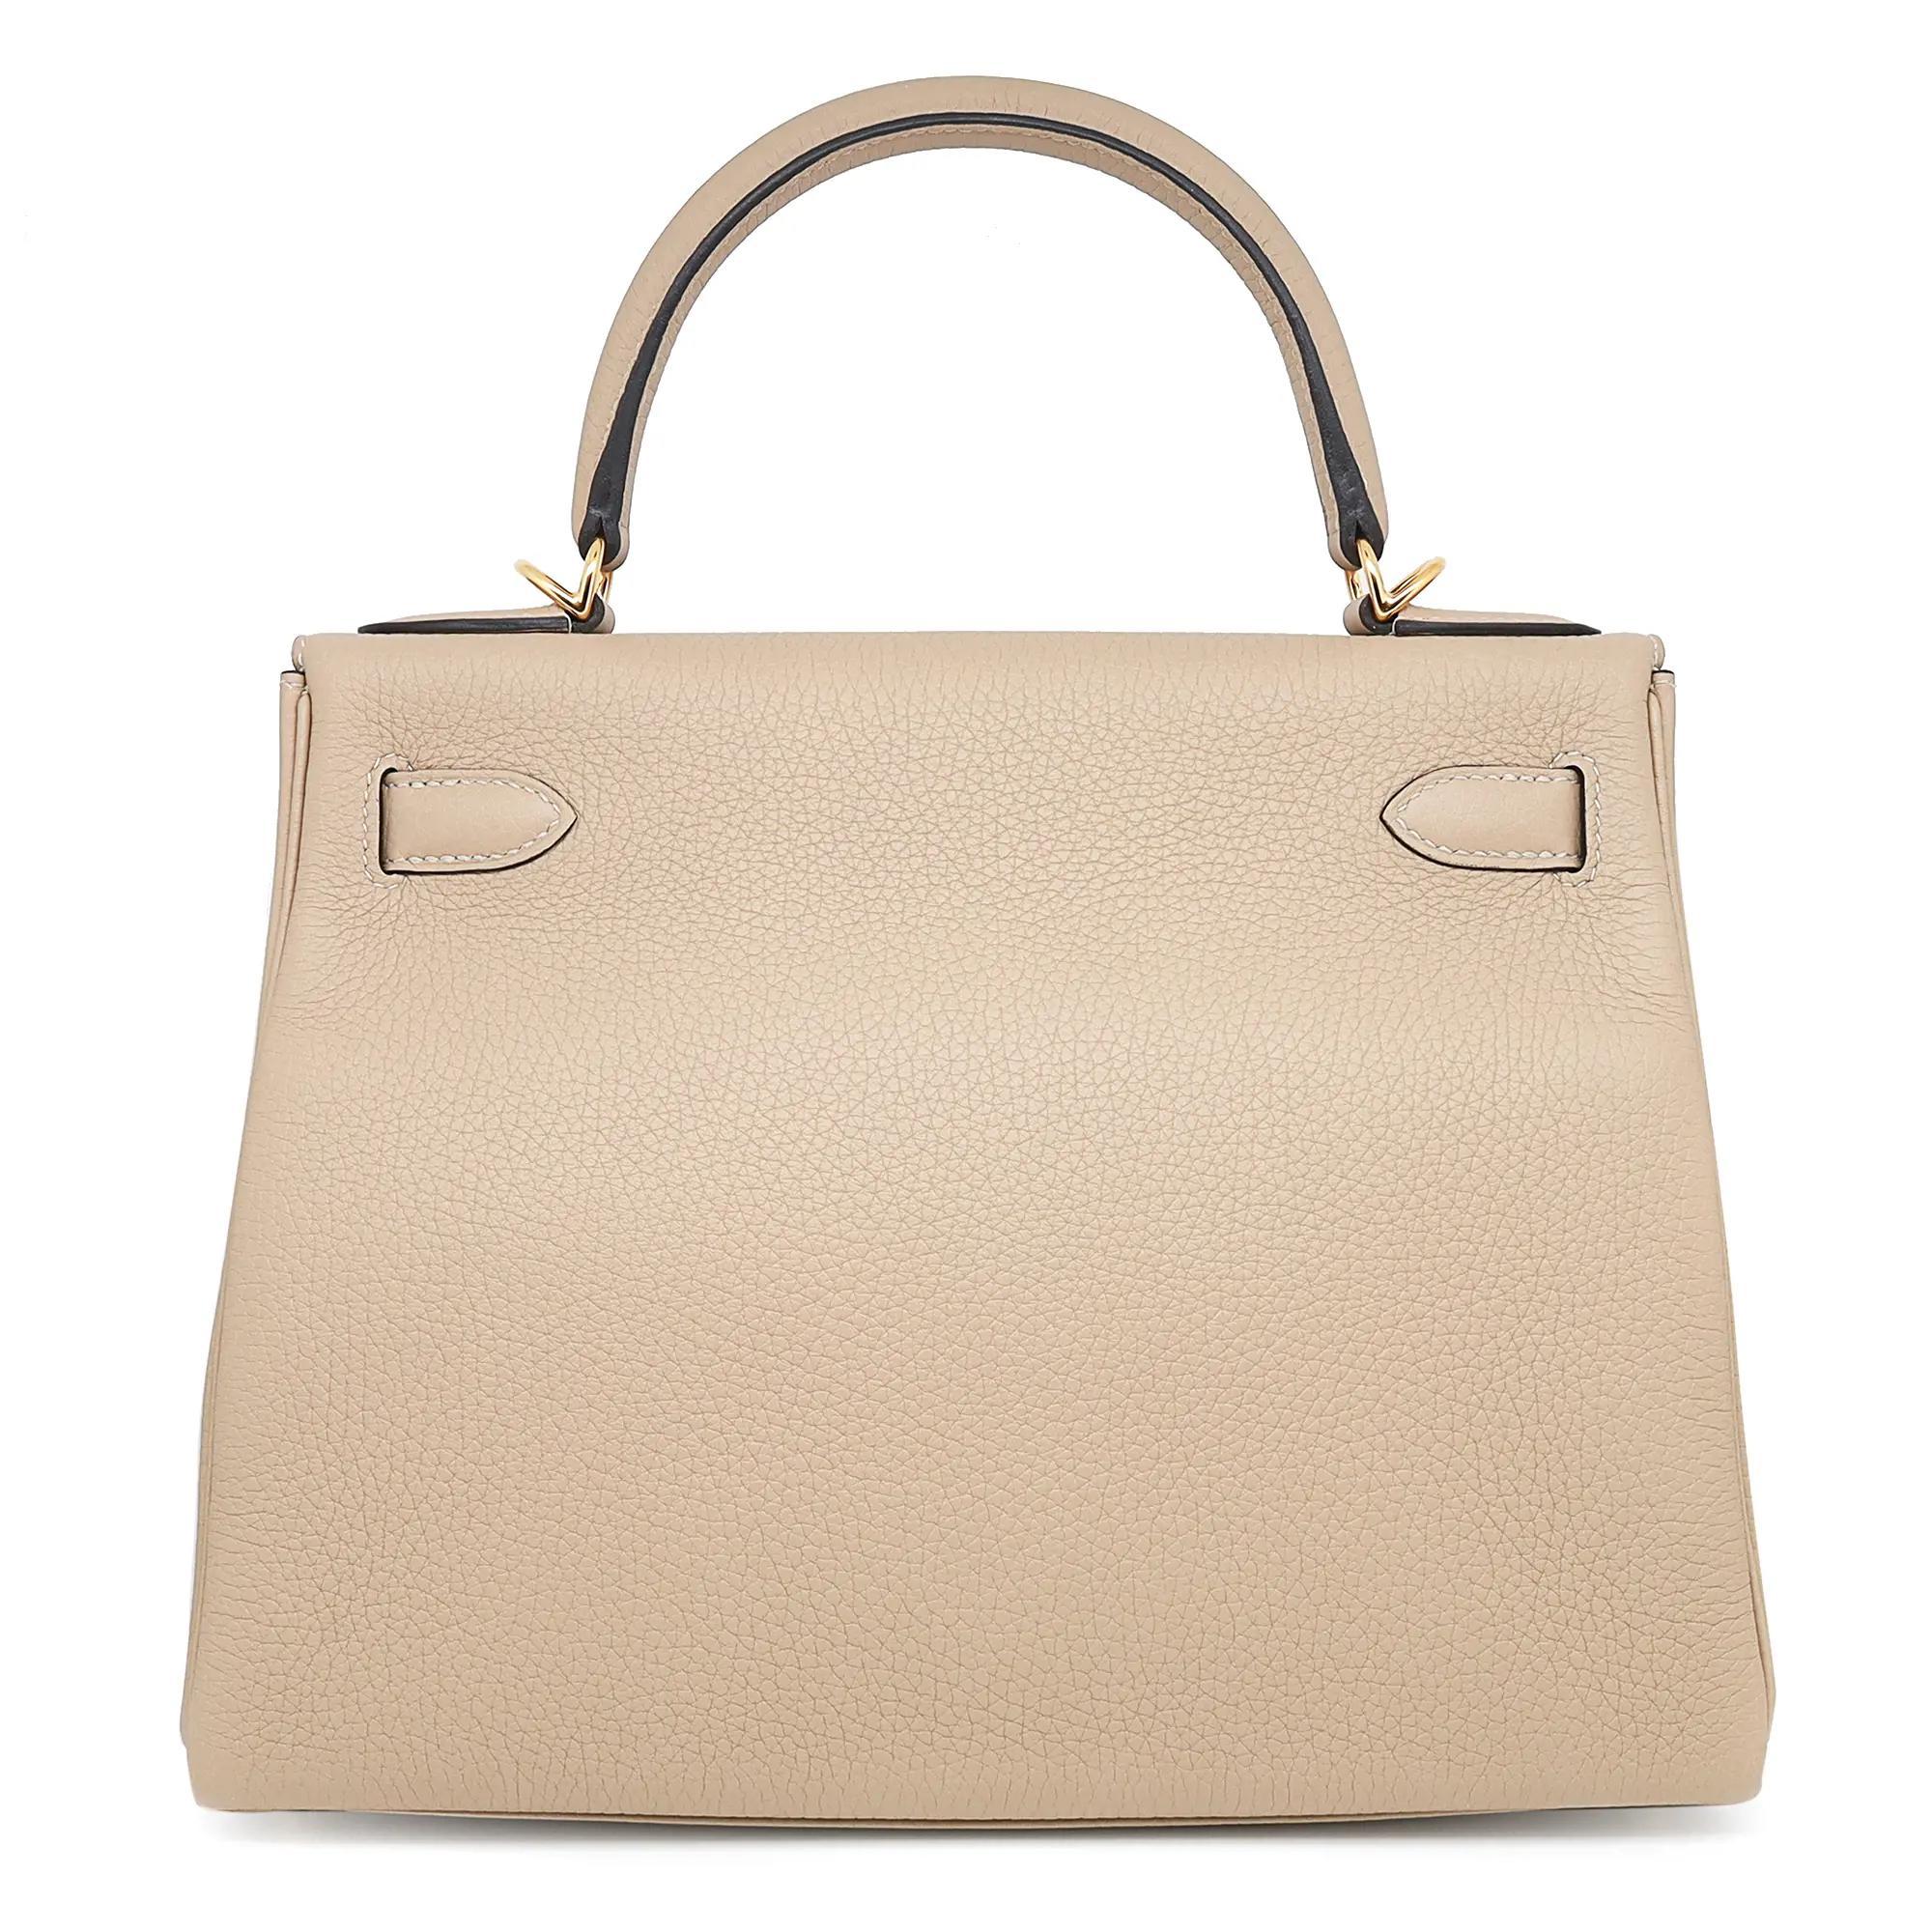 Hermes Kelly 28 Retourne Clemence Trench Gold Hardware Bag This stunning Hermes classic handbag is beautifully crafted in calfskin Clemence Trench leather. Comes with a single rolled leather top handle with a detachable leather shoulder strap. The